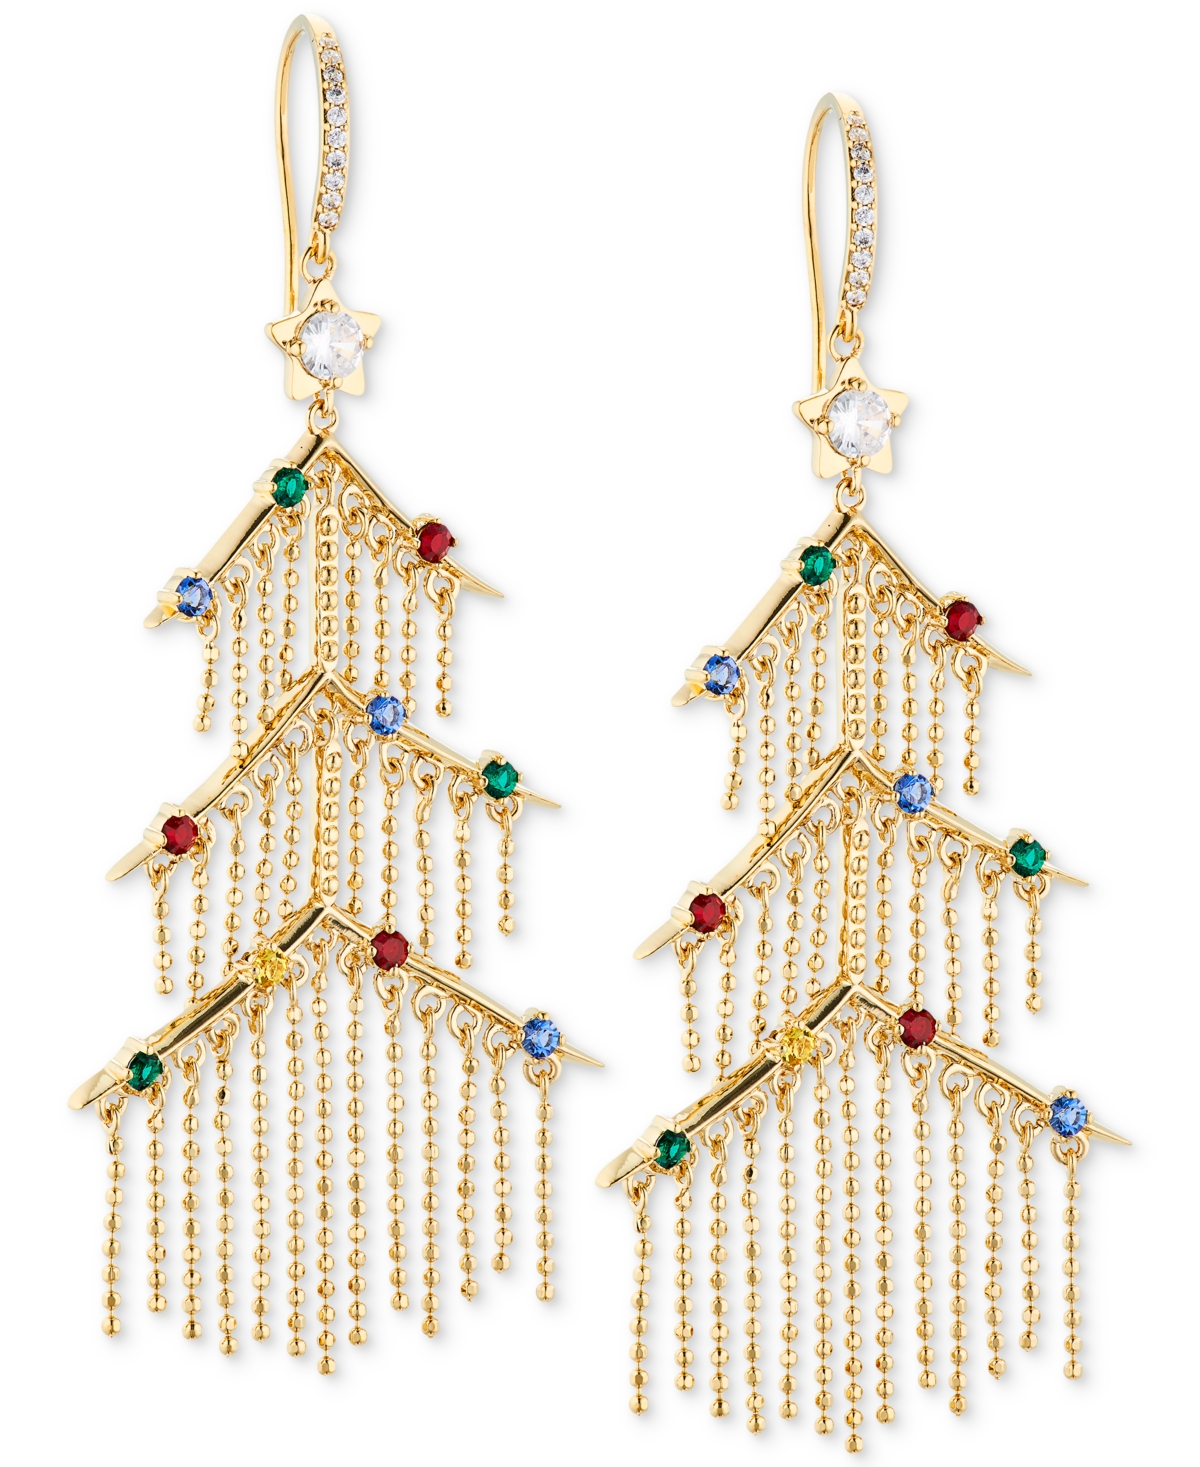 Gold-Tone Crystal Tinsel Tree Chandelier Earrings - Gold